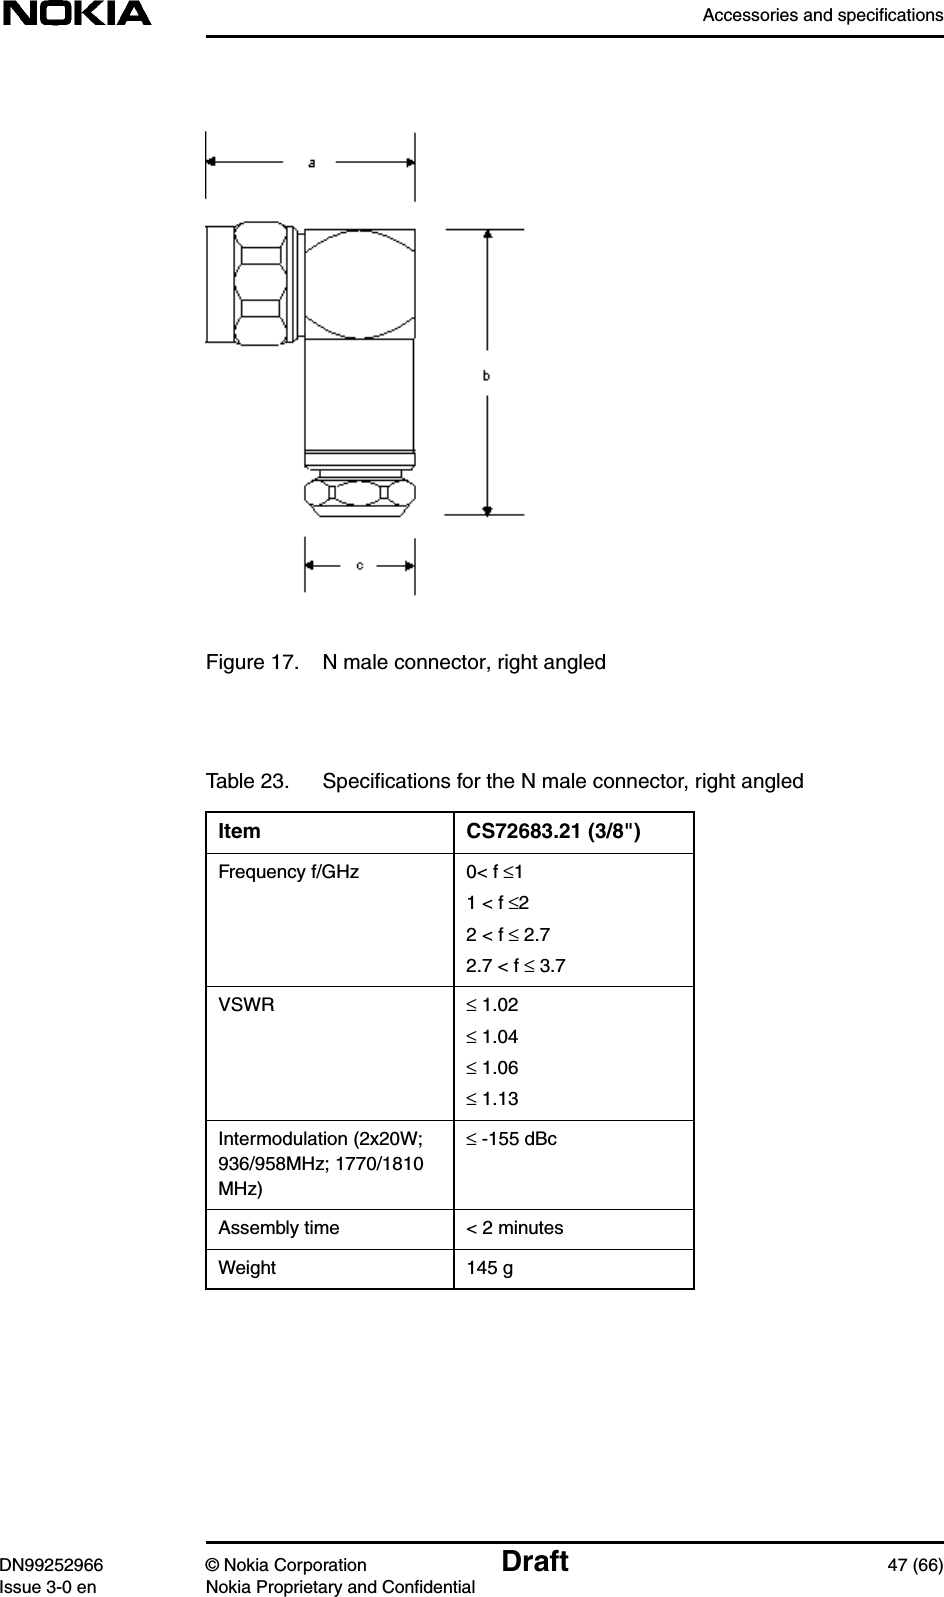 Accessories and specificationsDN99252966 © Nokia Corporation Draft 47 (66)Issue 3-0 en Nokia Proprietary and ConfidentialFigure 17. N male connector, right angledTable 23. Speciﬁcations for the N male connector, right angledItem CS72683.21 (3/8&quot;)Frequency f/GHz 0&lt; f ≤11 &lt; f ≤22 &lt; f ≤ 2.72.7 &lt; f ≤ 3.7VSWR ≤ 1.02≤ 1.04≤ 1.06≤ 1.13Intermodulation (2x20W;936/958MHz; 1770/1810MHz)≤ -155 dBcAssembly time &lt; 2 minutesWeight 145 g